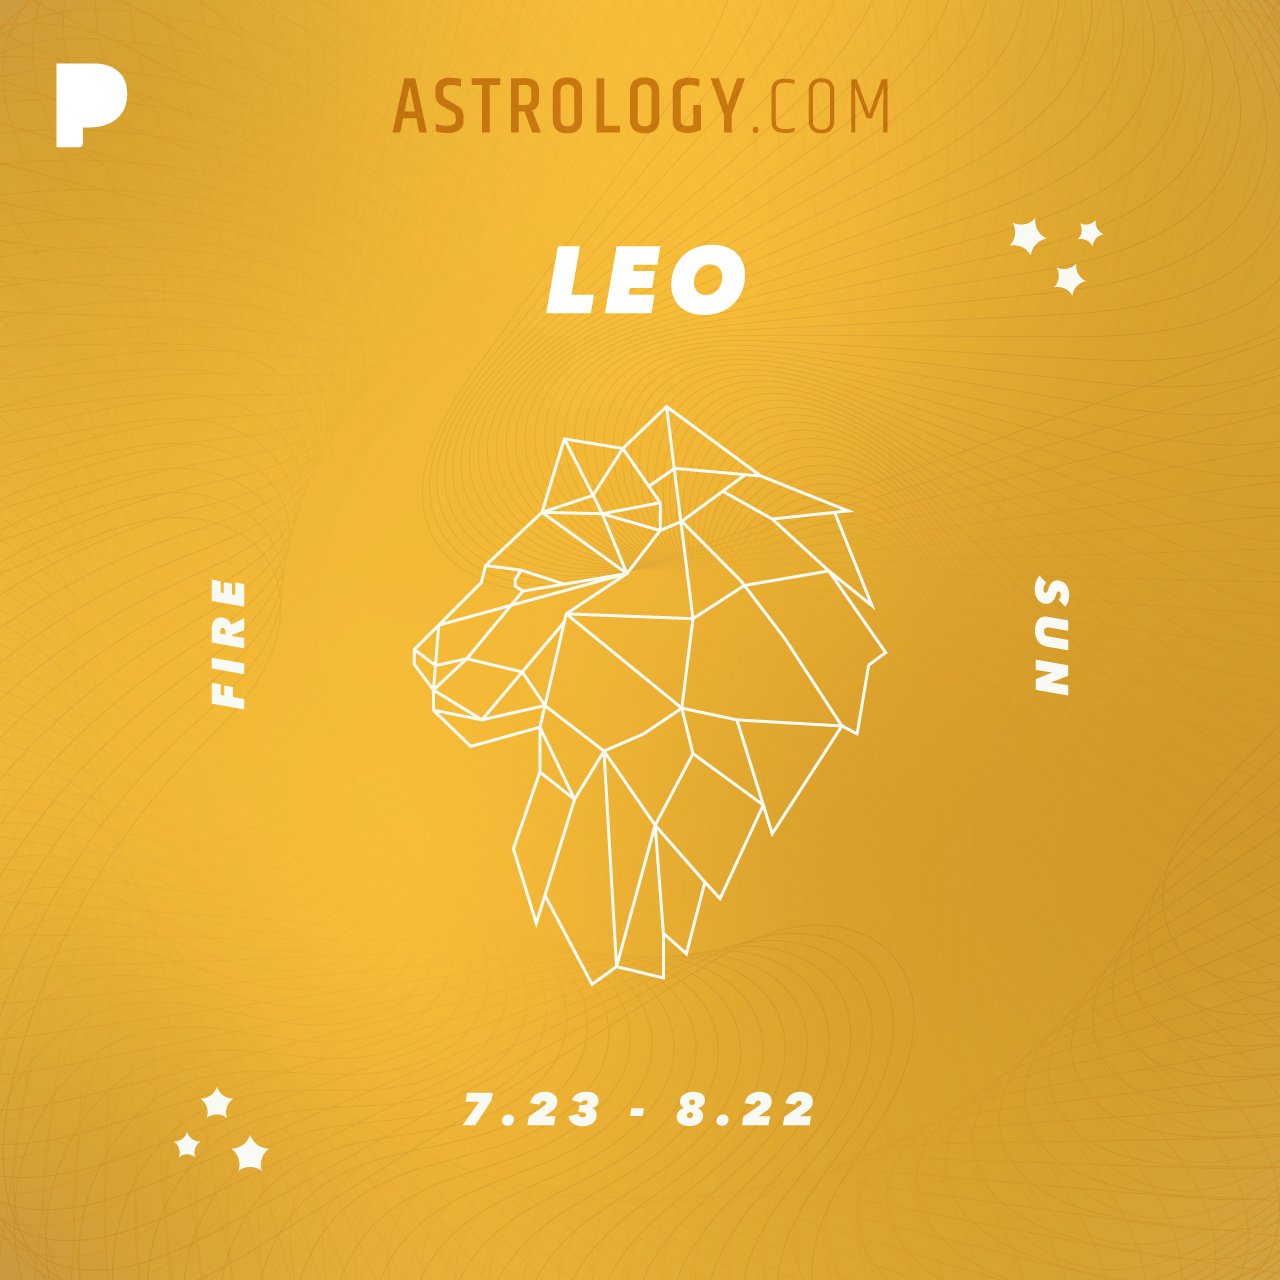 Our Leo Season Pandora Playlist Is Here & It’s Time to Channel Your Inner Diva